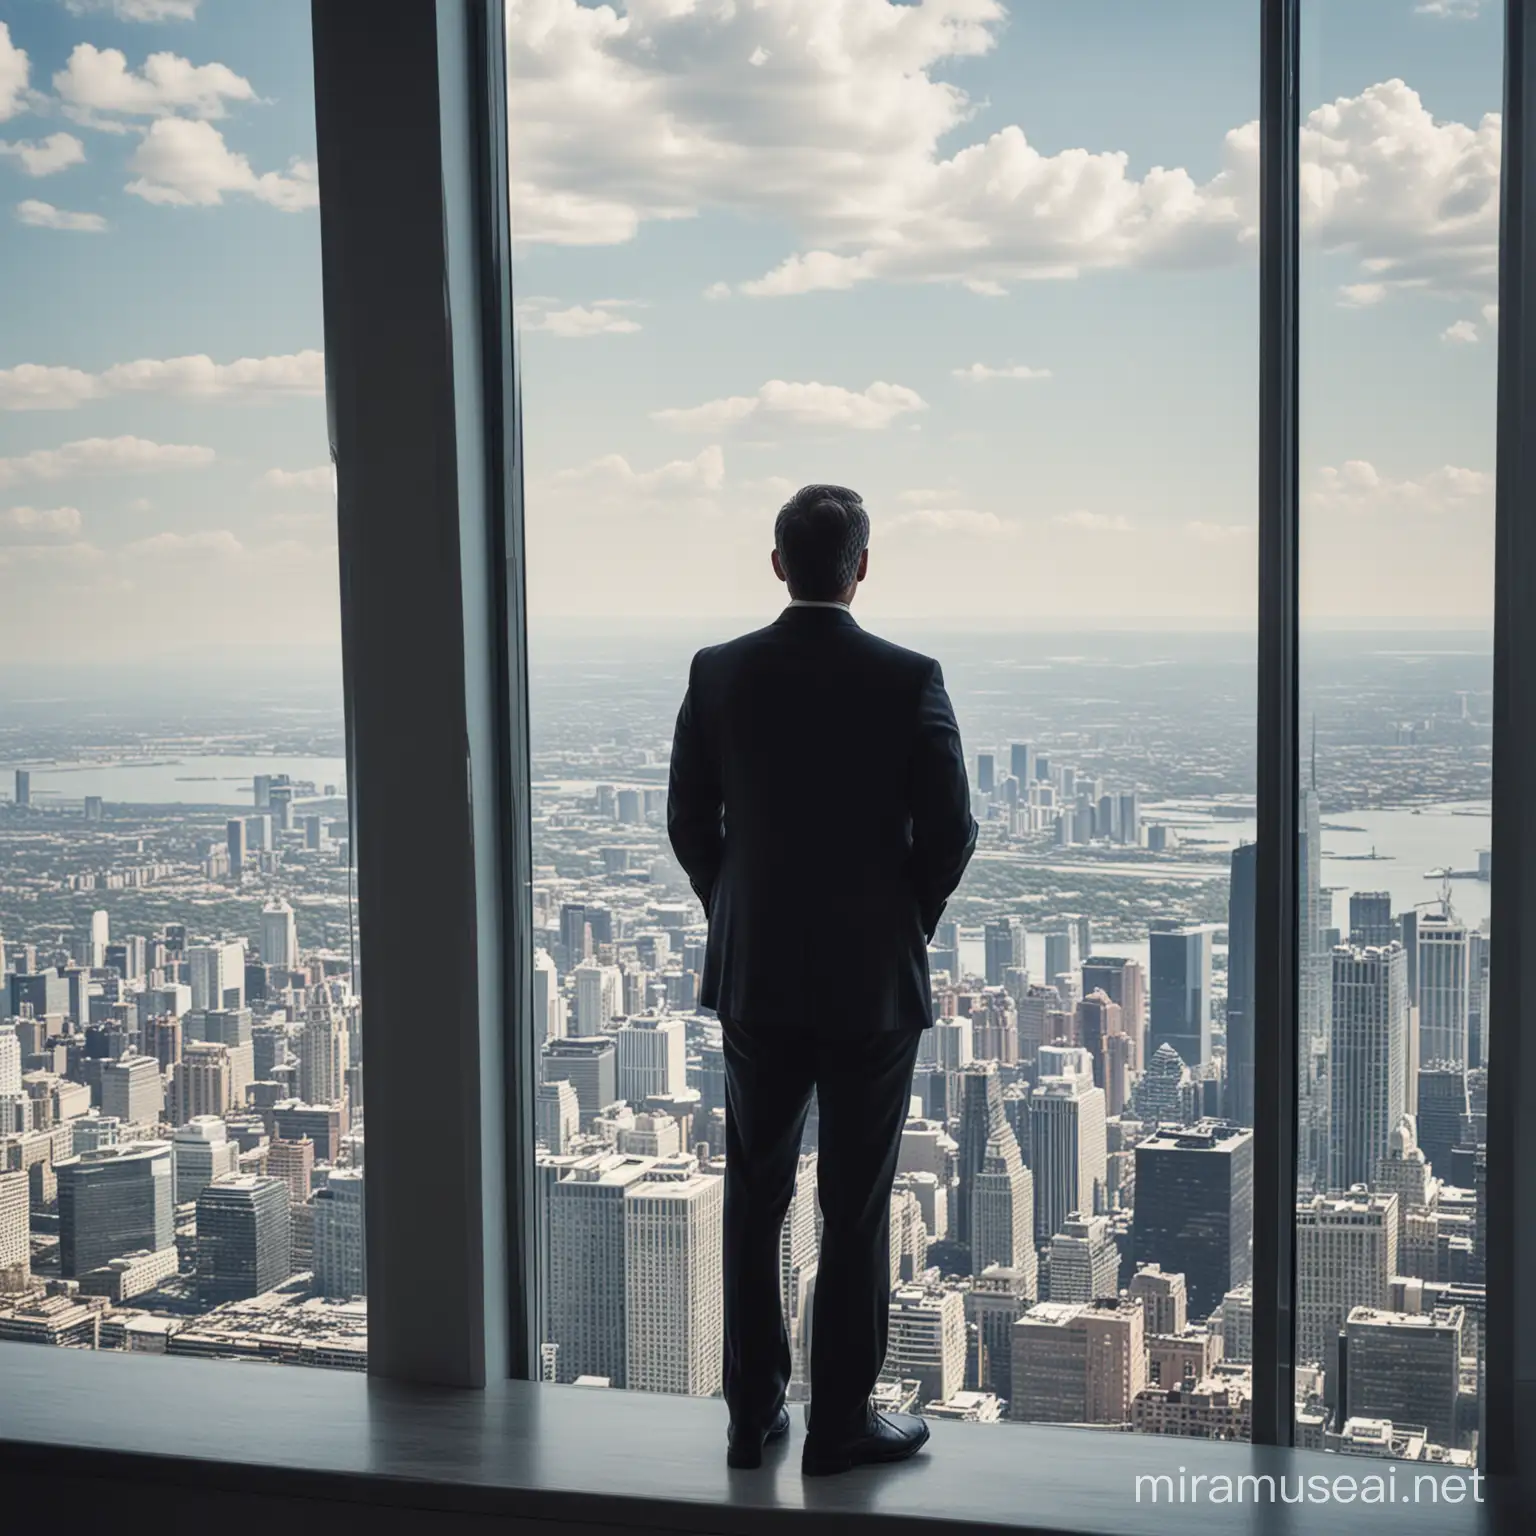 Chief executive officer of a major company looking out top story window over a large city.